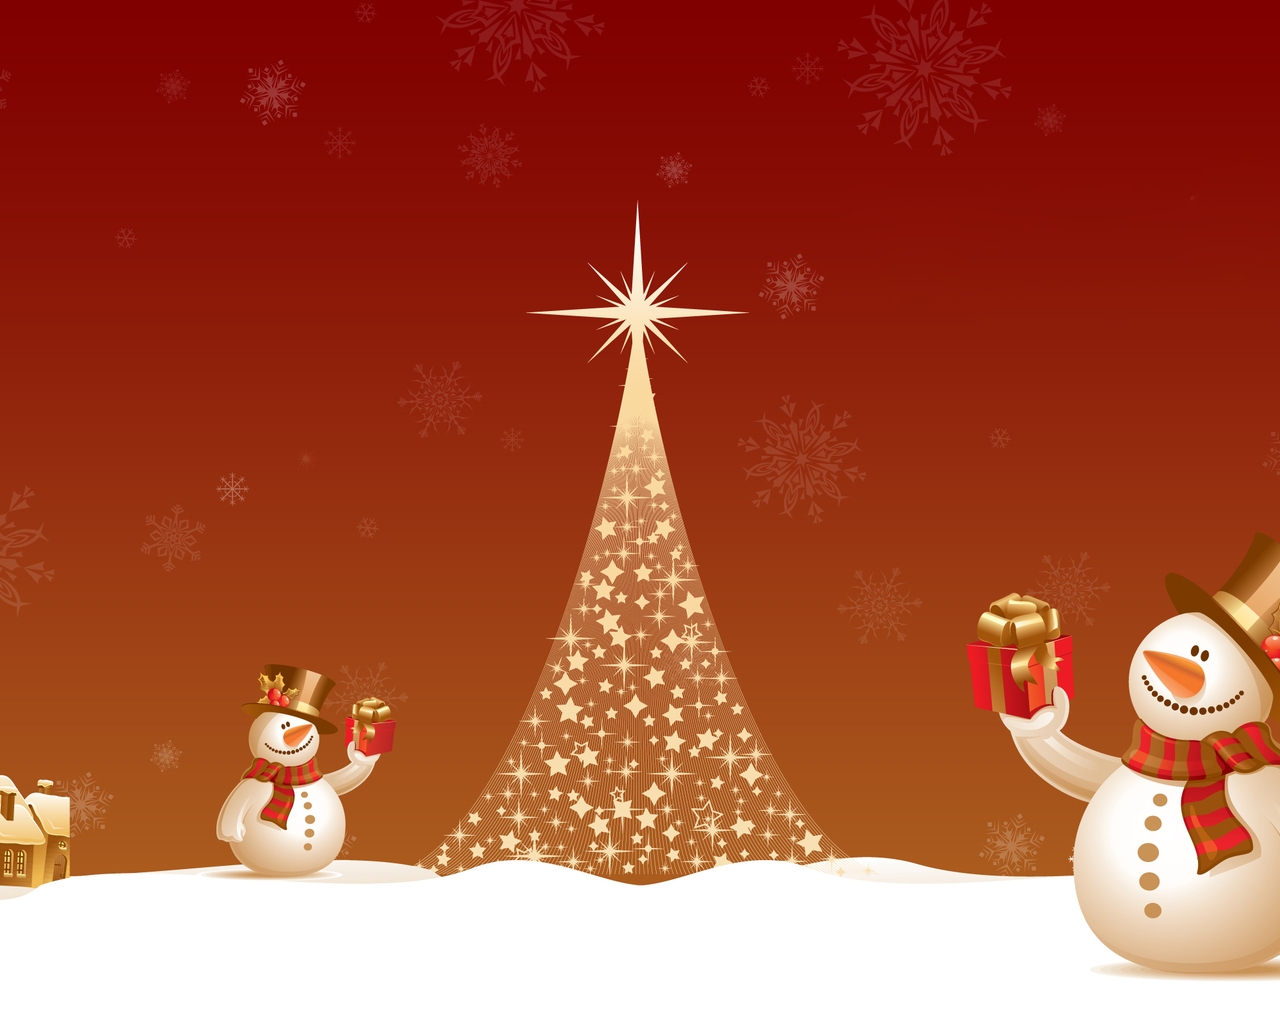 Snowman Close to Christmas Tree for 1280 x 1024 resolution